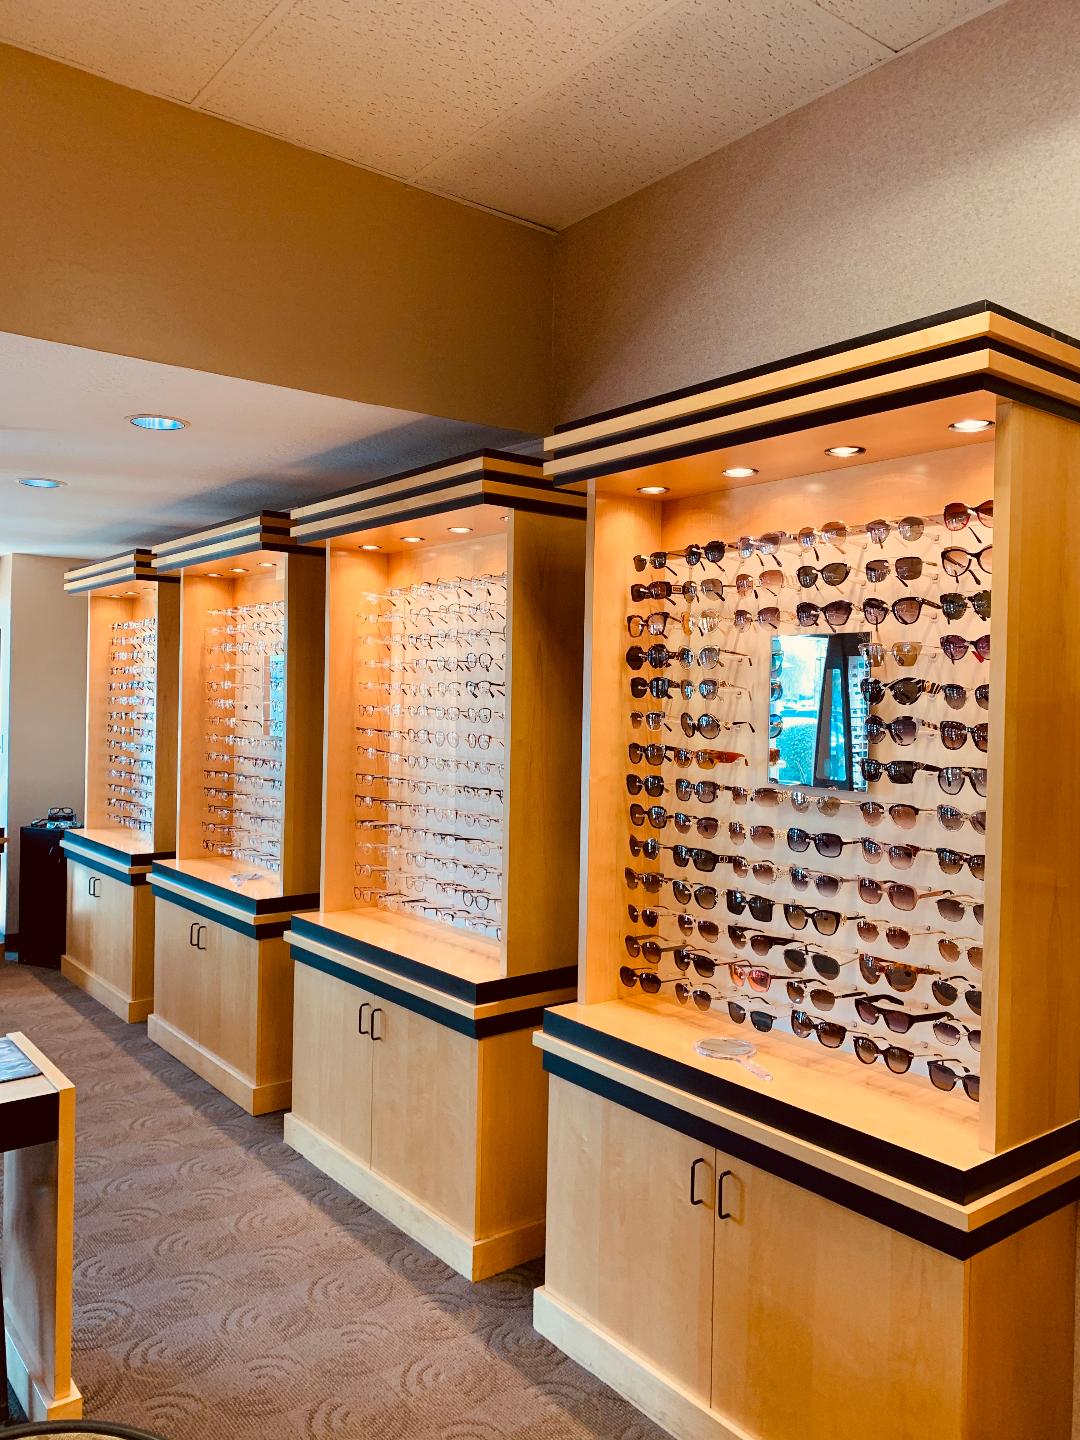 25% OFF Sunglasses at Optical Expressions